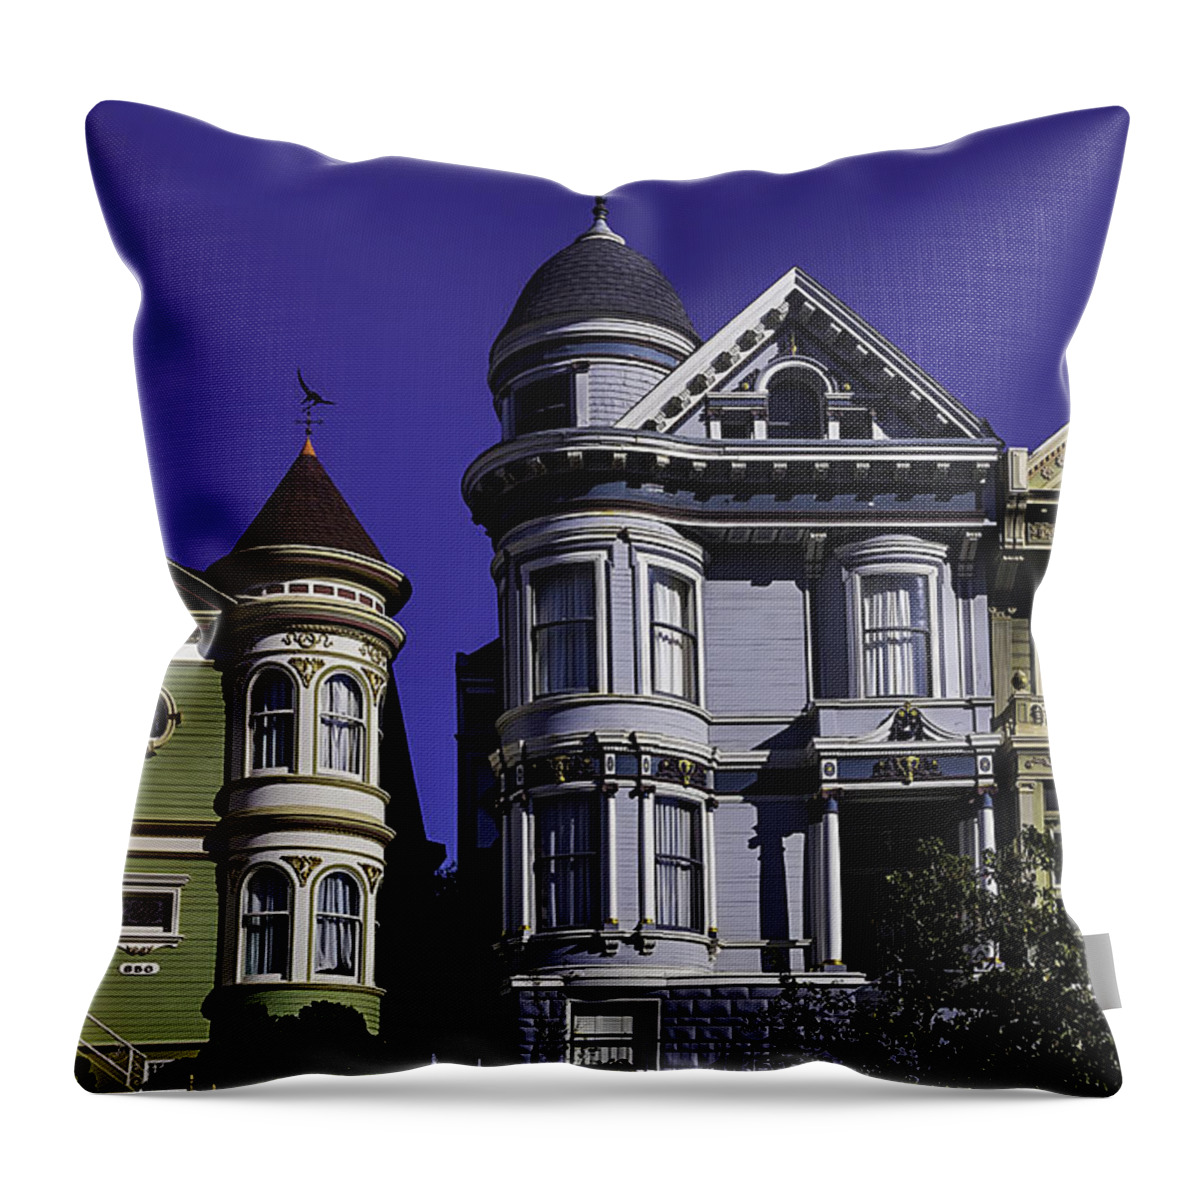 Victorian Throw Pillow featuring the photograph Victorian Beauties by Garry Gay